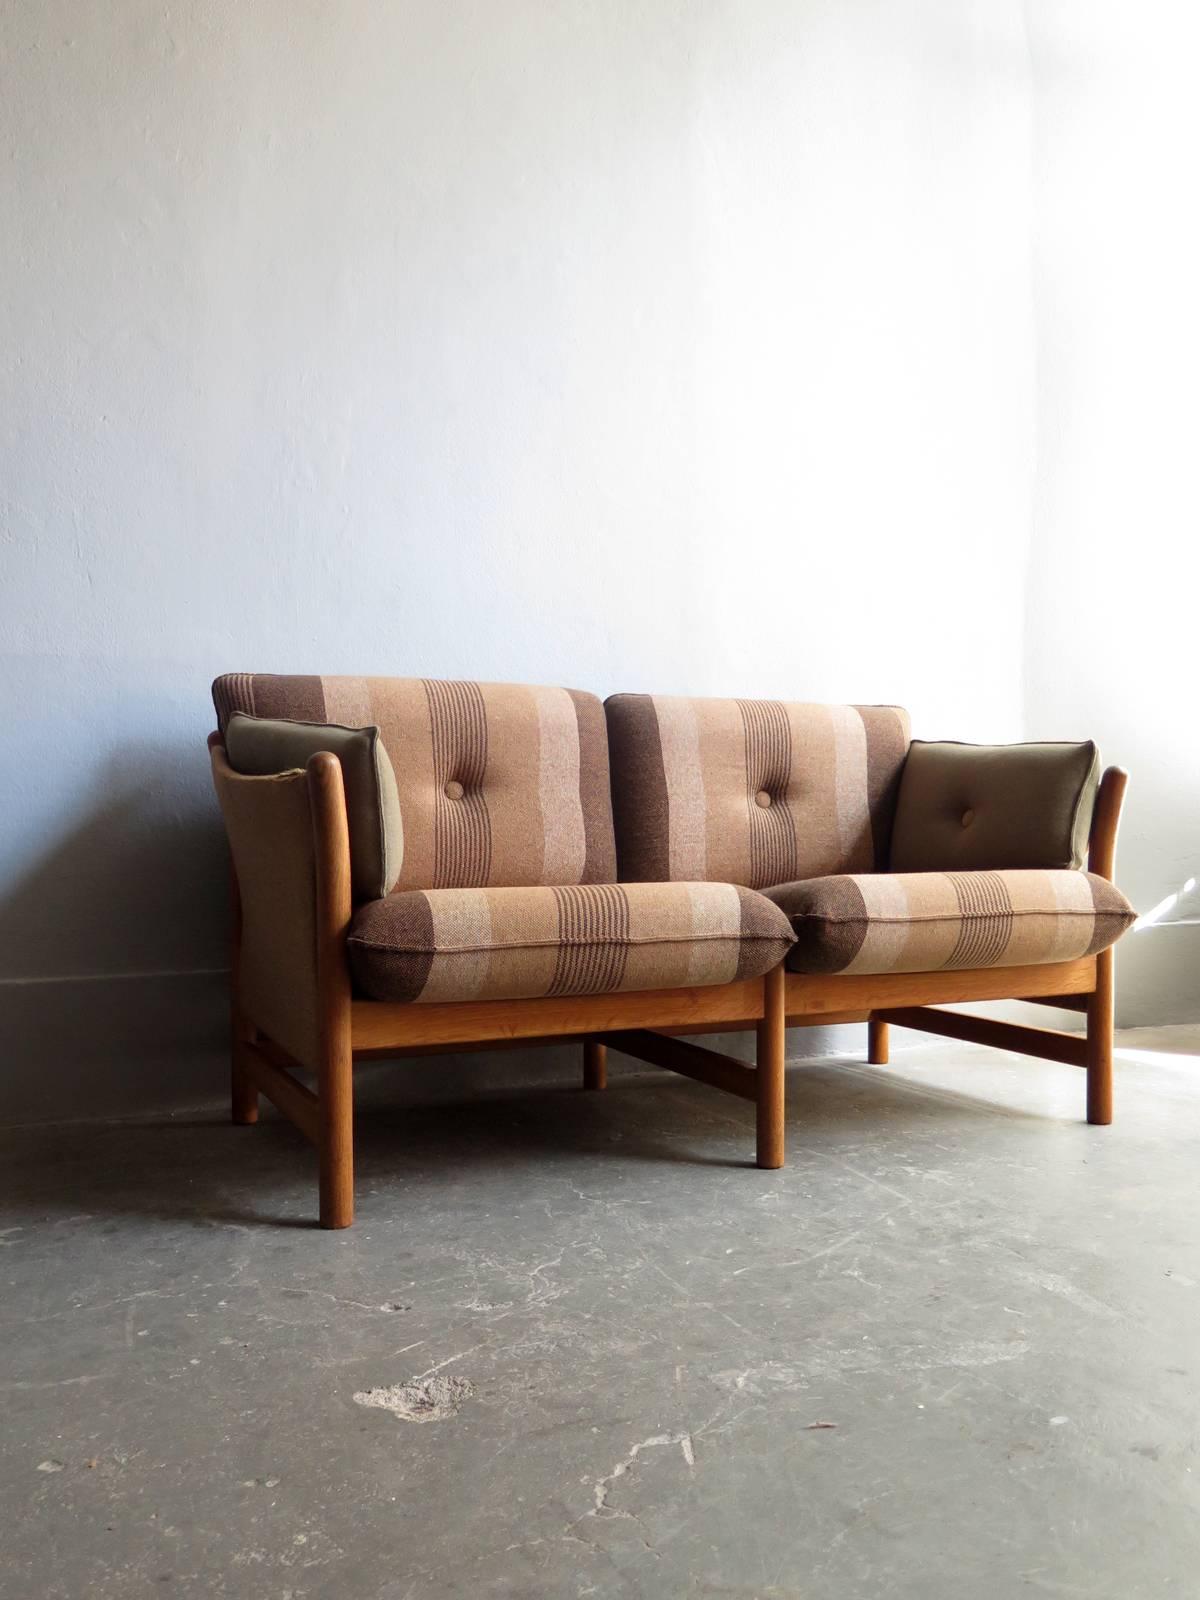 Two-seat oak sofa designed by Arne Norell with original fabric.